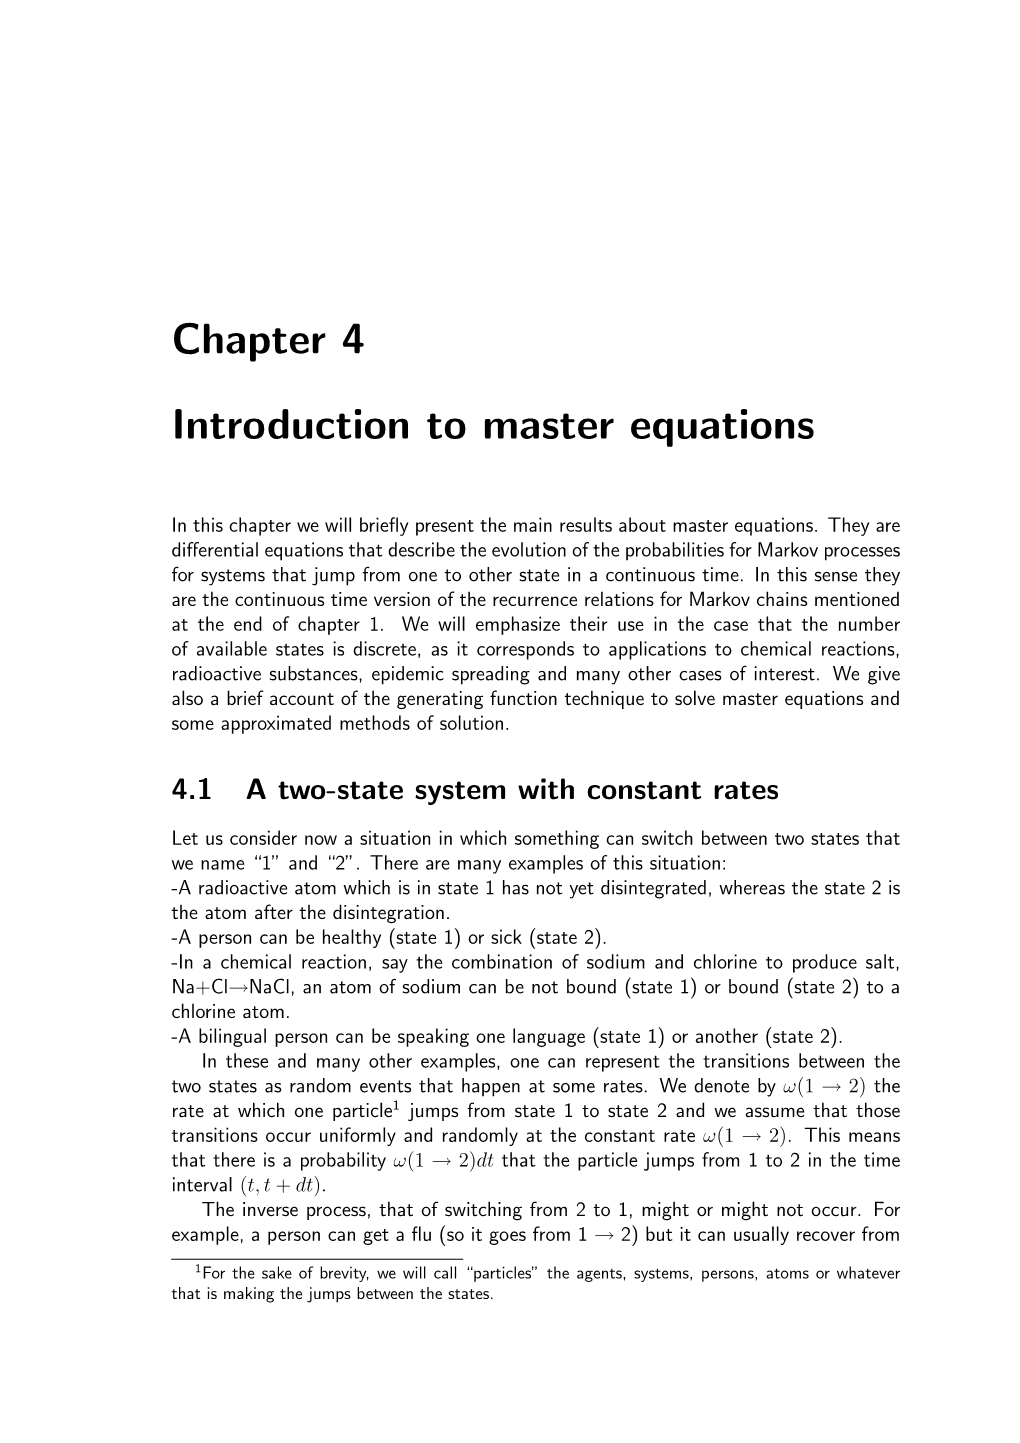 Chapter 4 Introduction to Master Equations